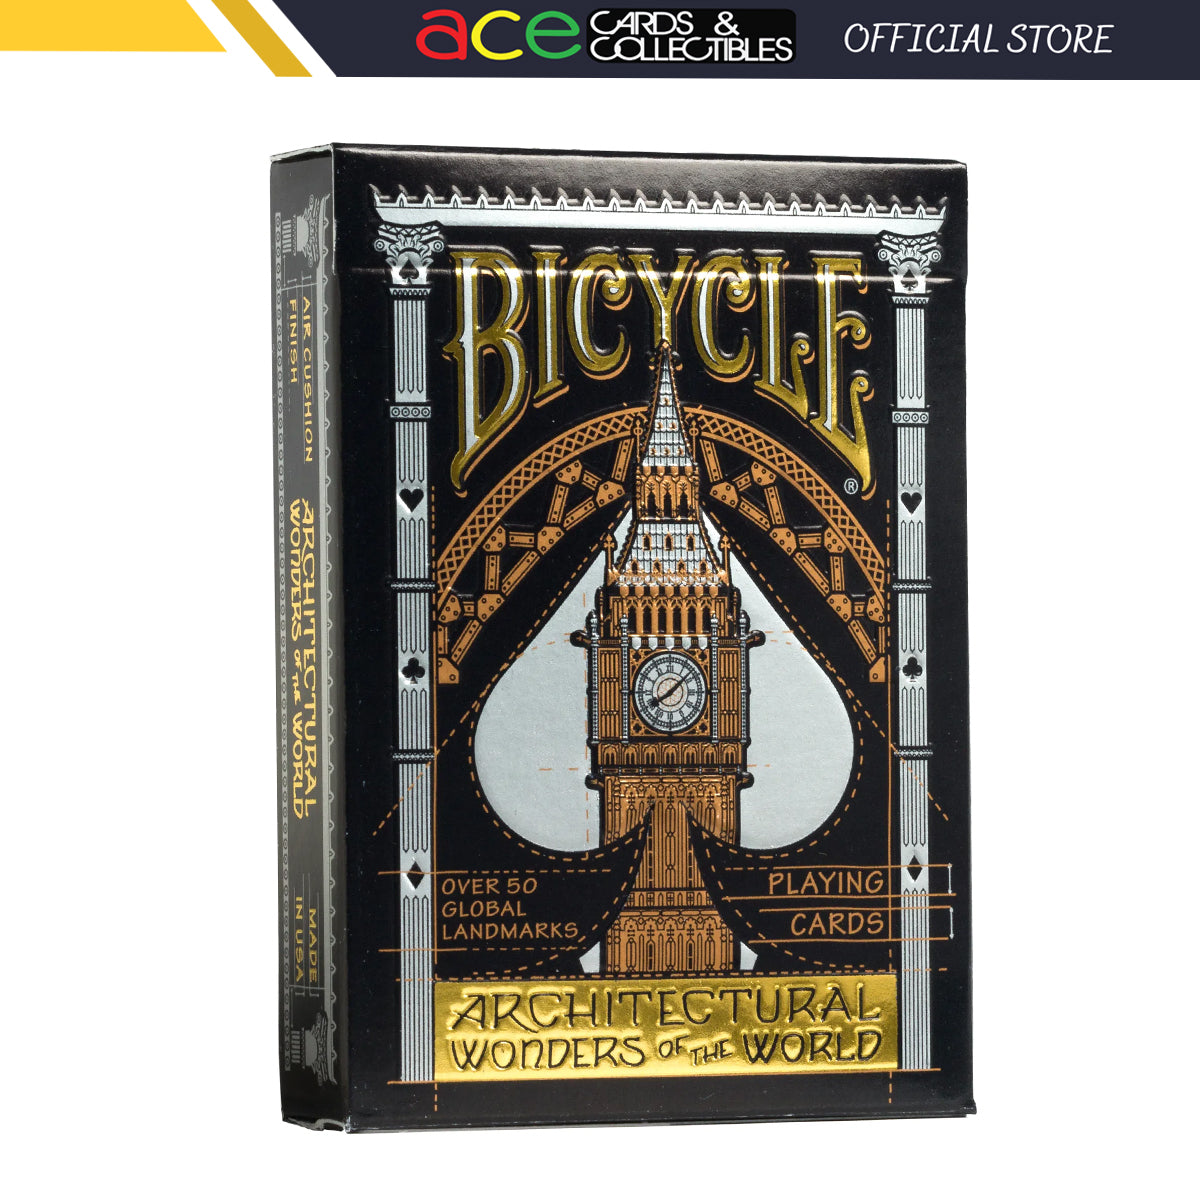 Bicycle Architectural Wonders-United States Playing Cards Company-Ace Cards & Collectibles